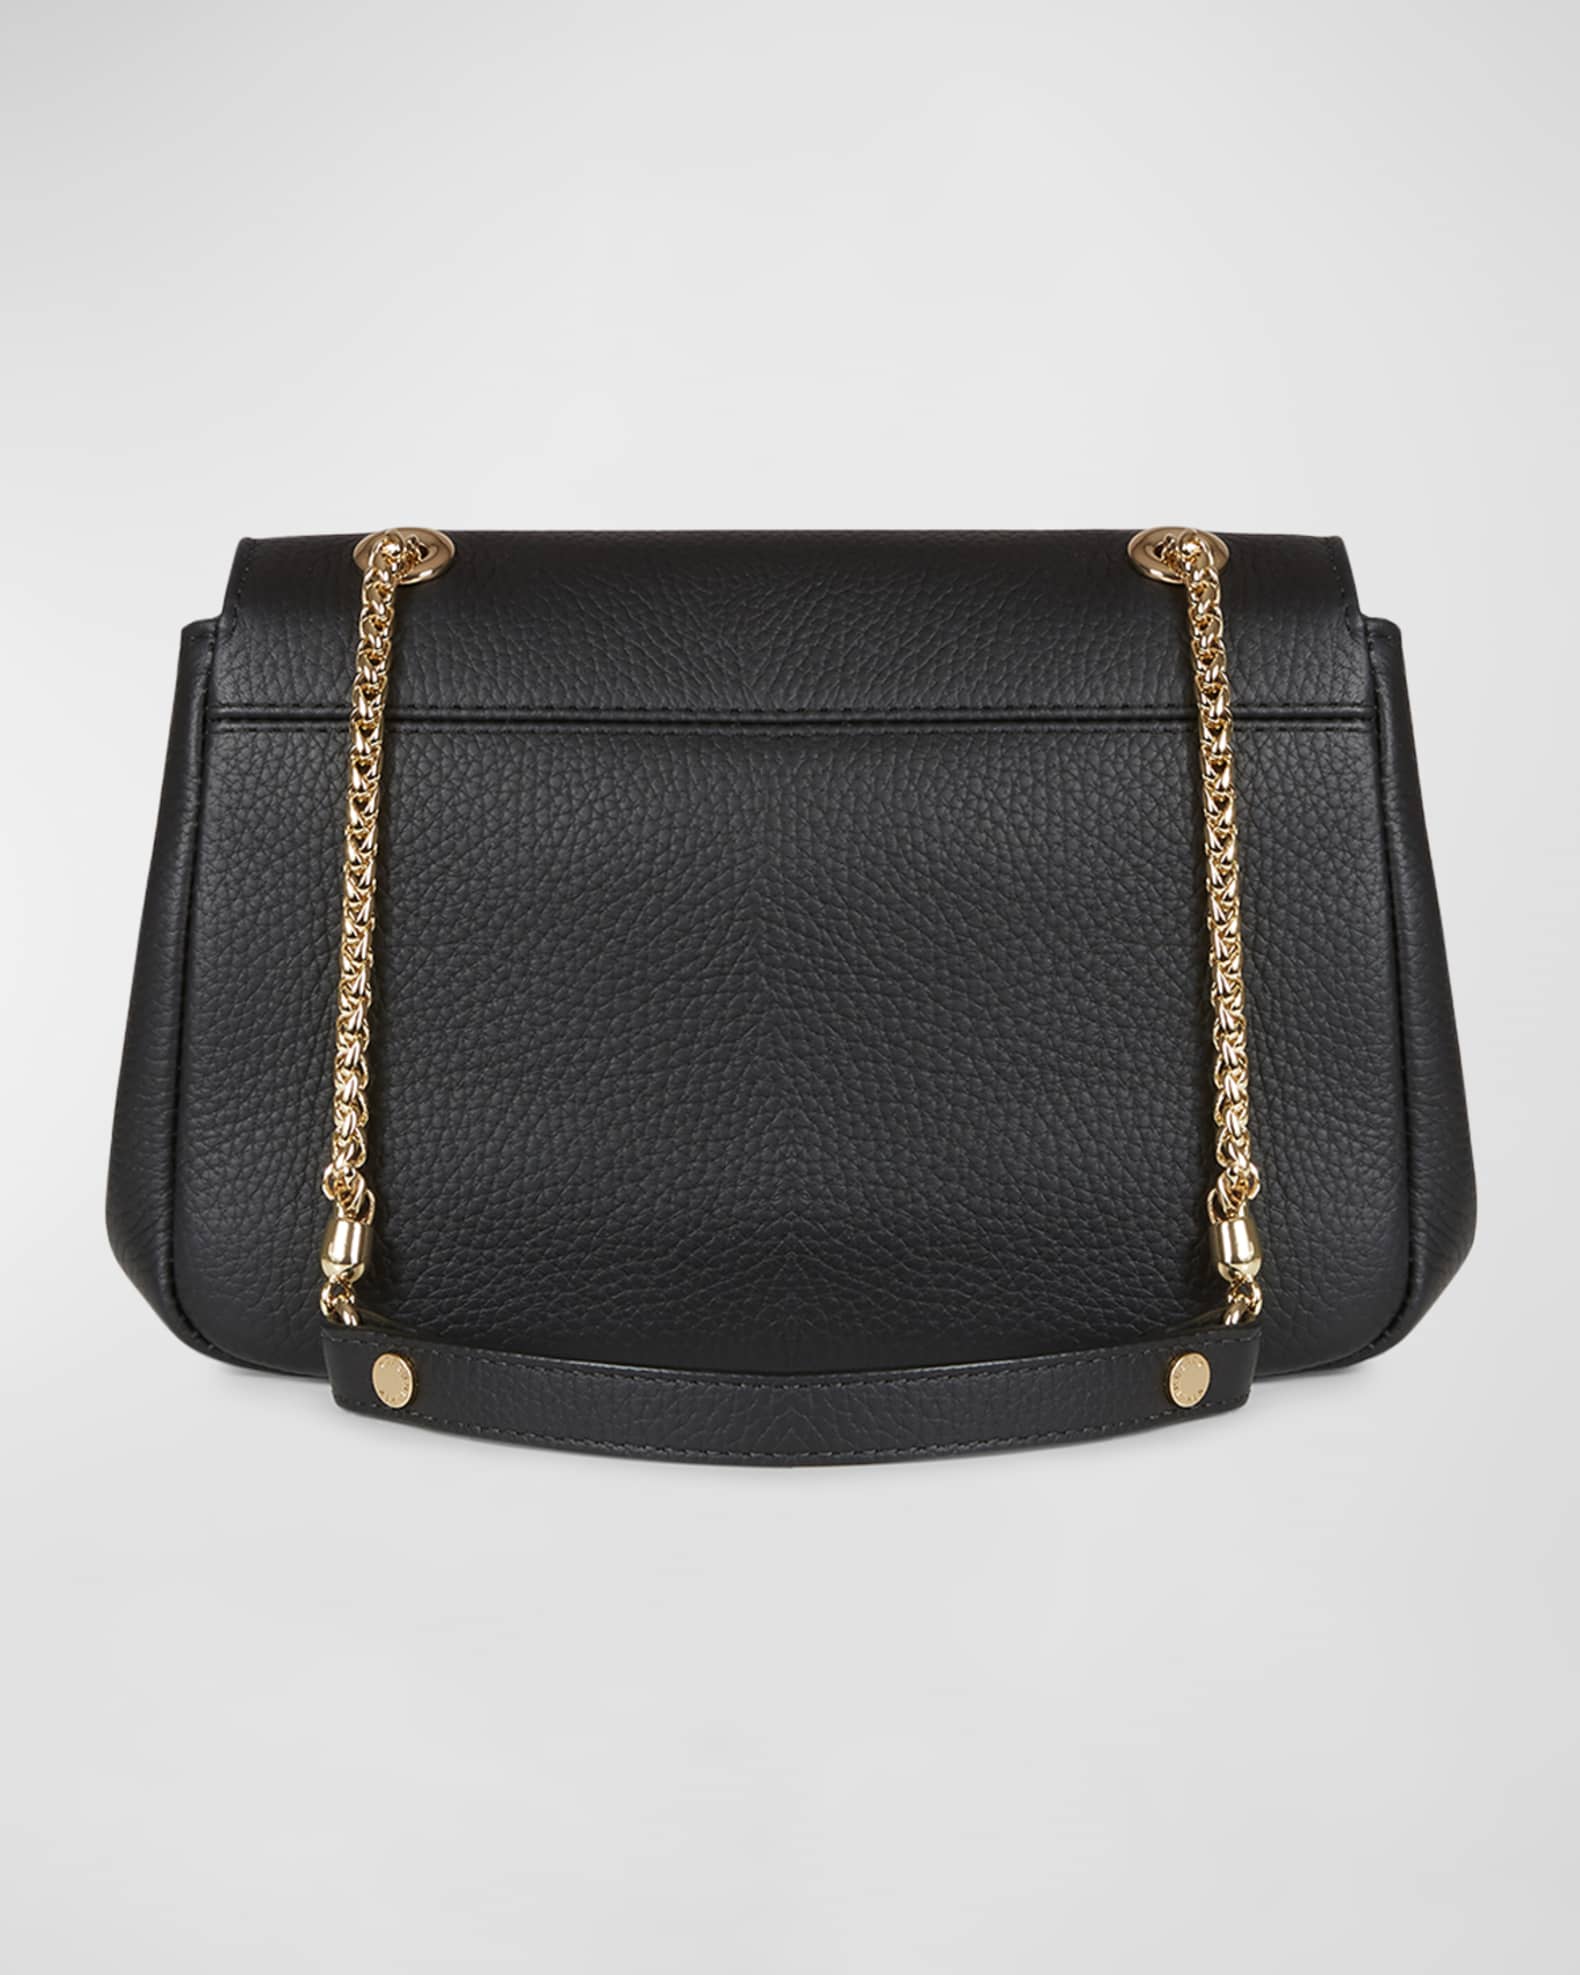 STRATHBERRY East-West Flap Leather Chain Shoulder Bag | Neiman Marcus